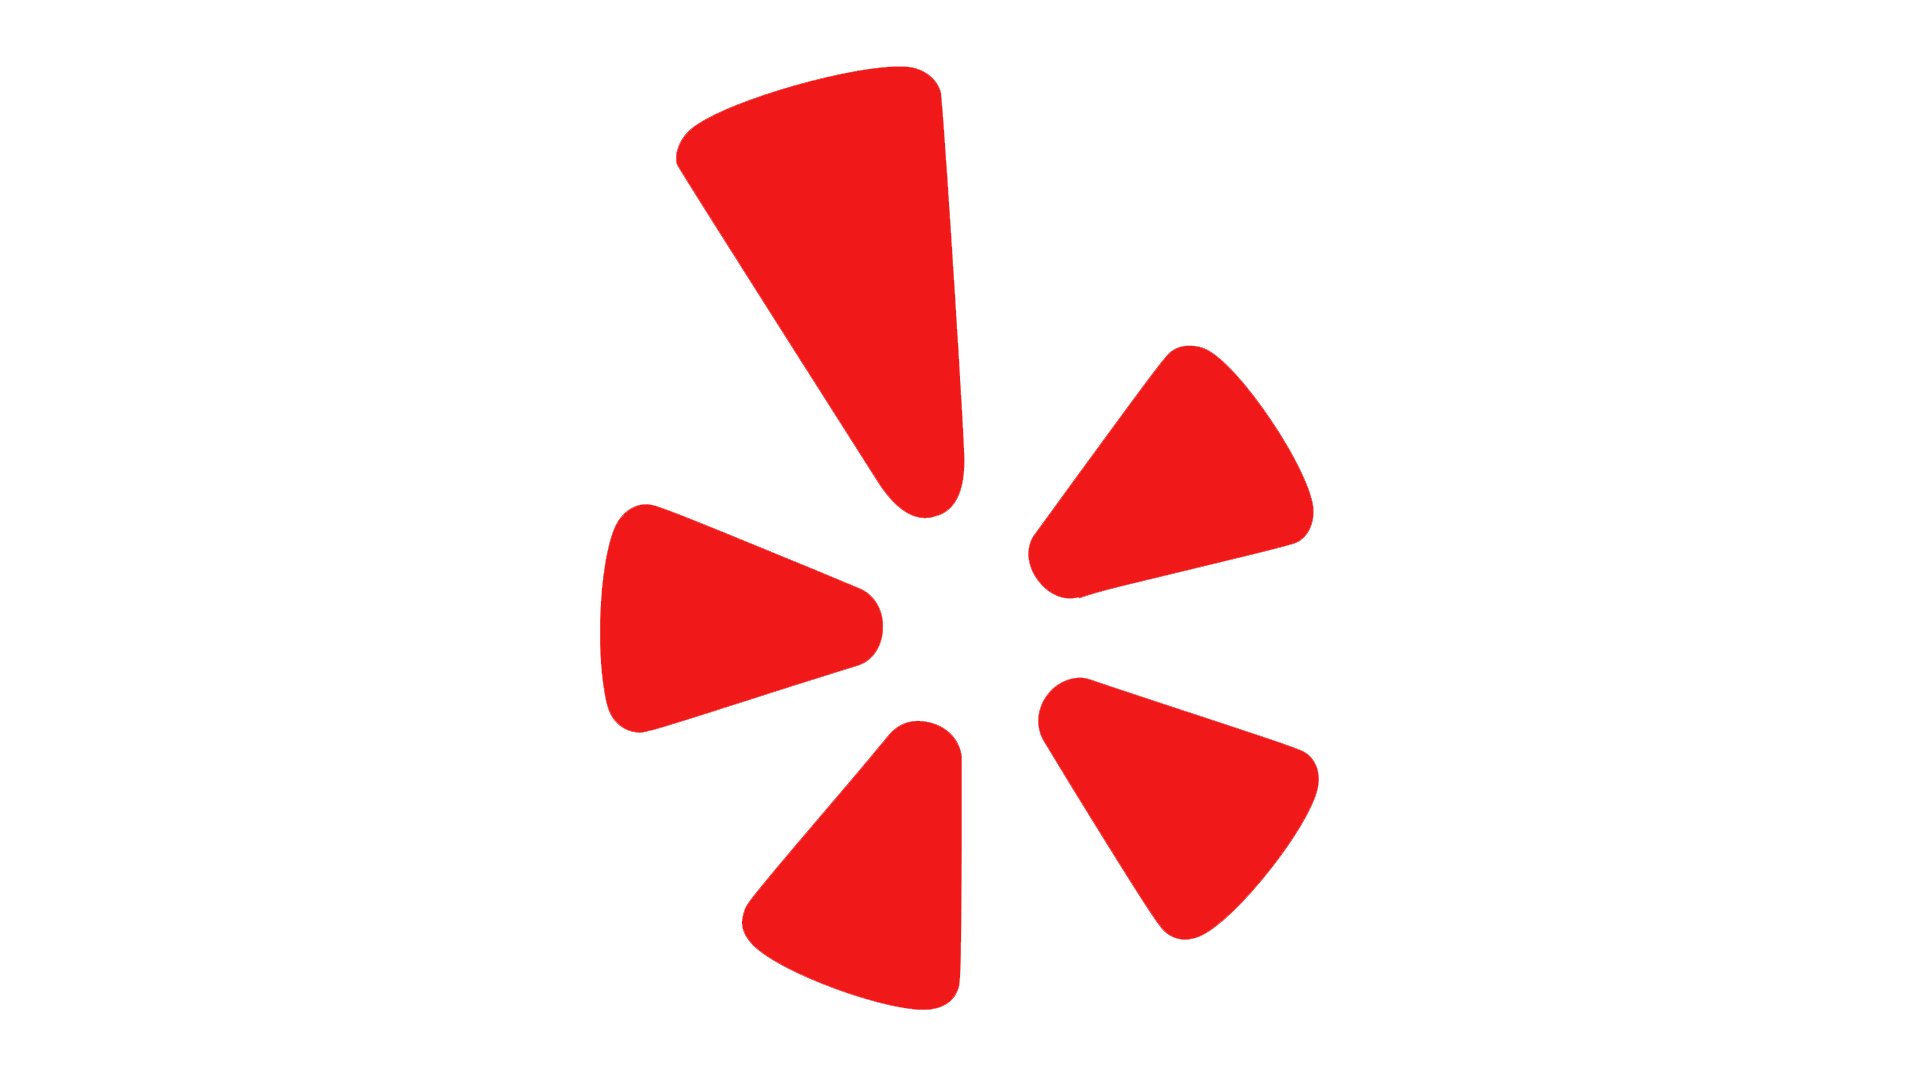 Yelp Logo, Yelp Symbol, Meaning, History and Evolution